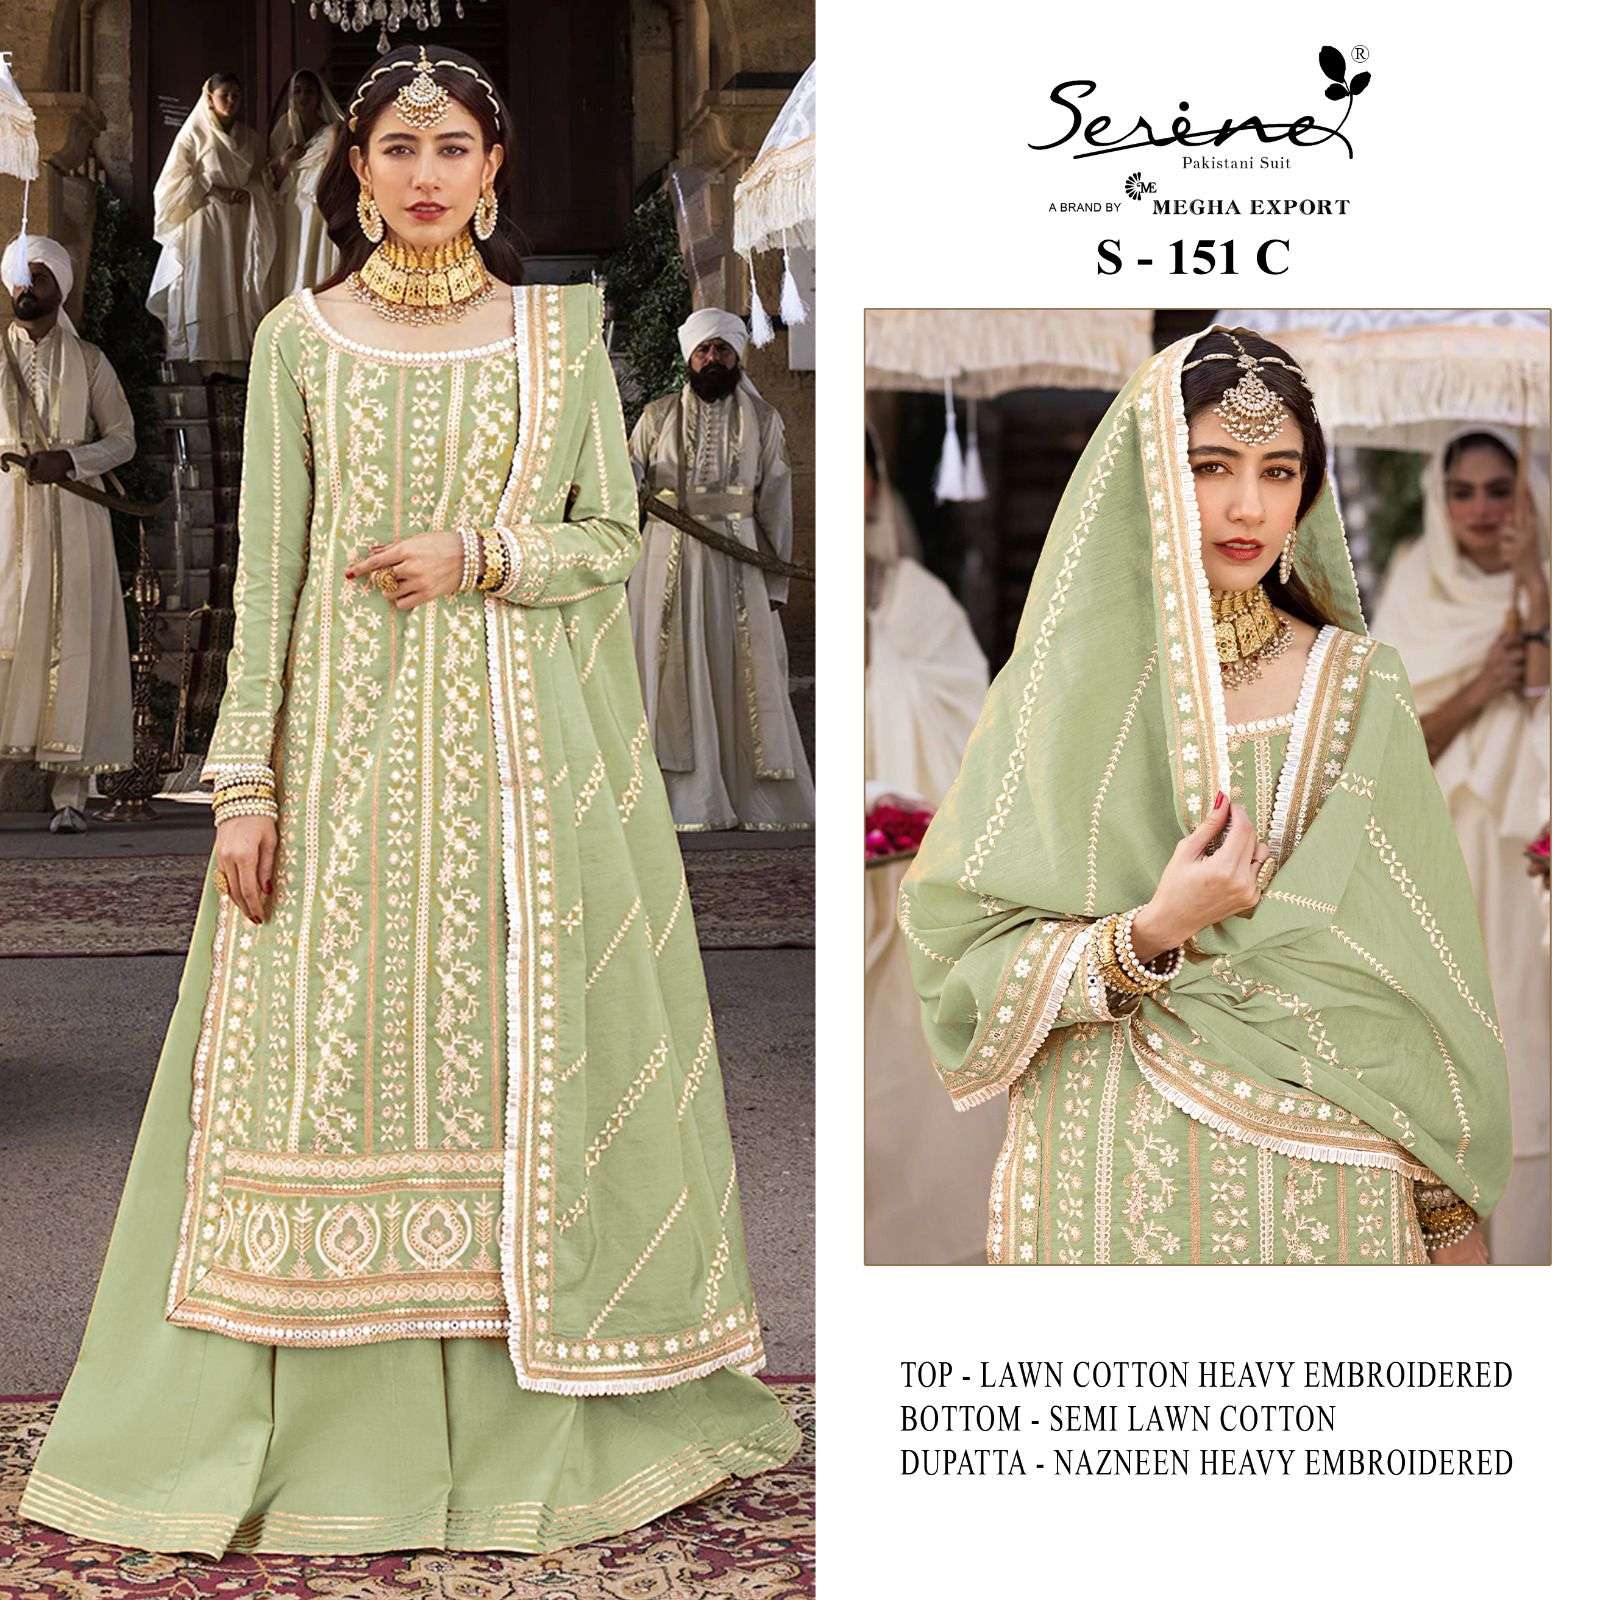 SERINE S 151 LAWN COTTON HEAVY EMBROIDERED SUITS WHOLESALE P...